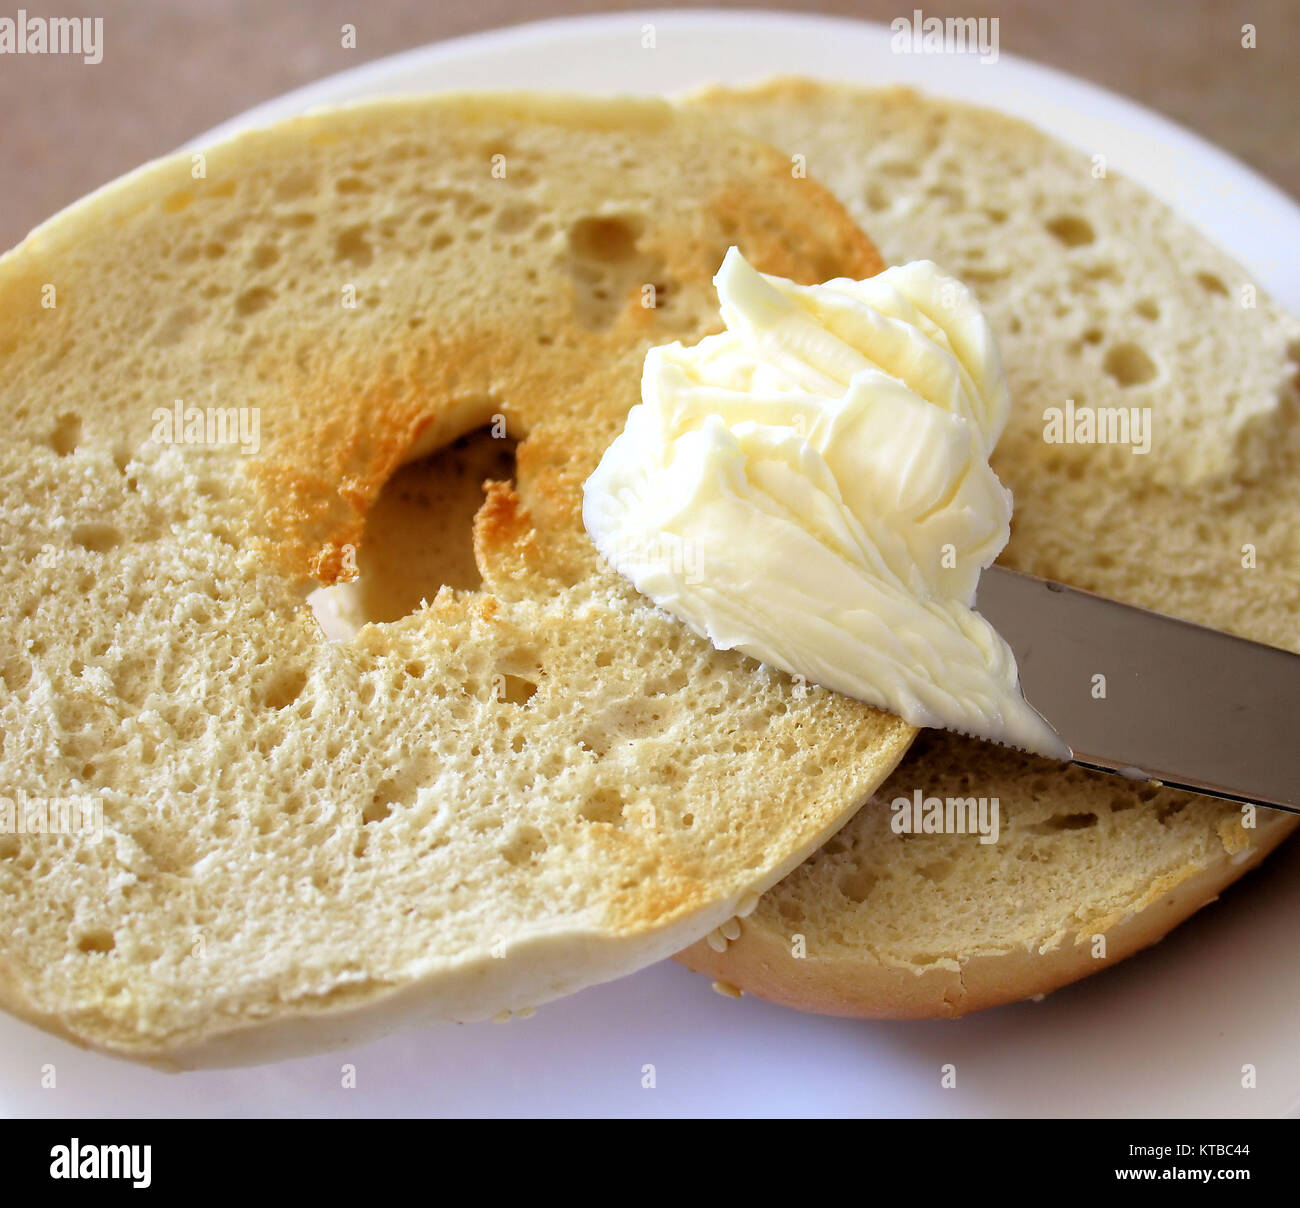 Toasted Bagel With Whipped Butter Stock Photo